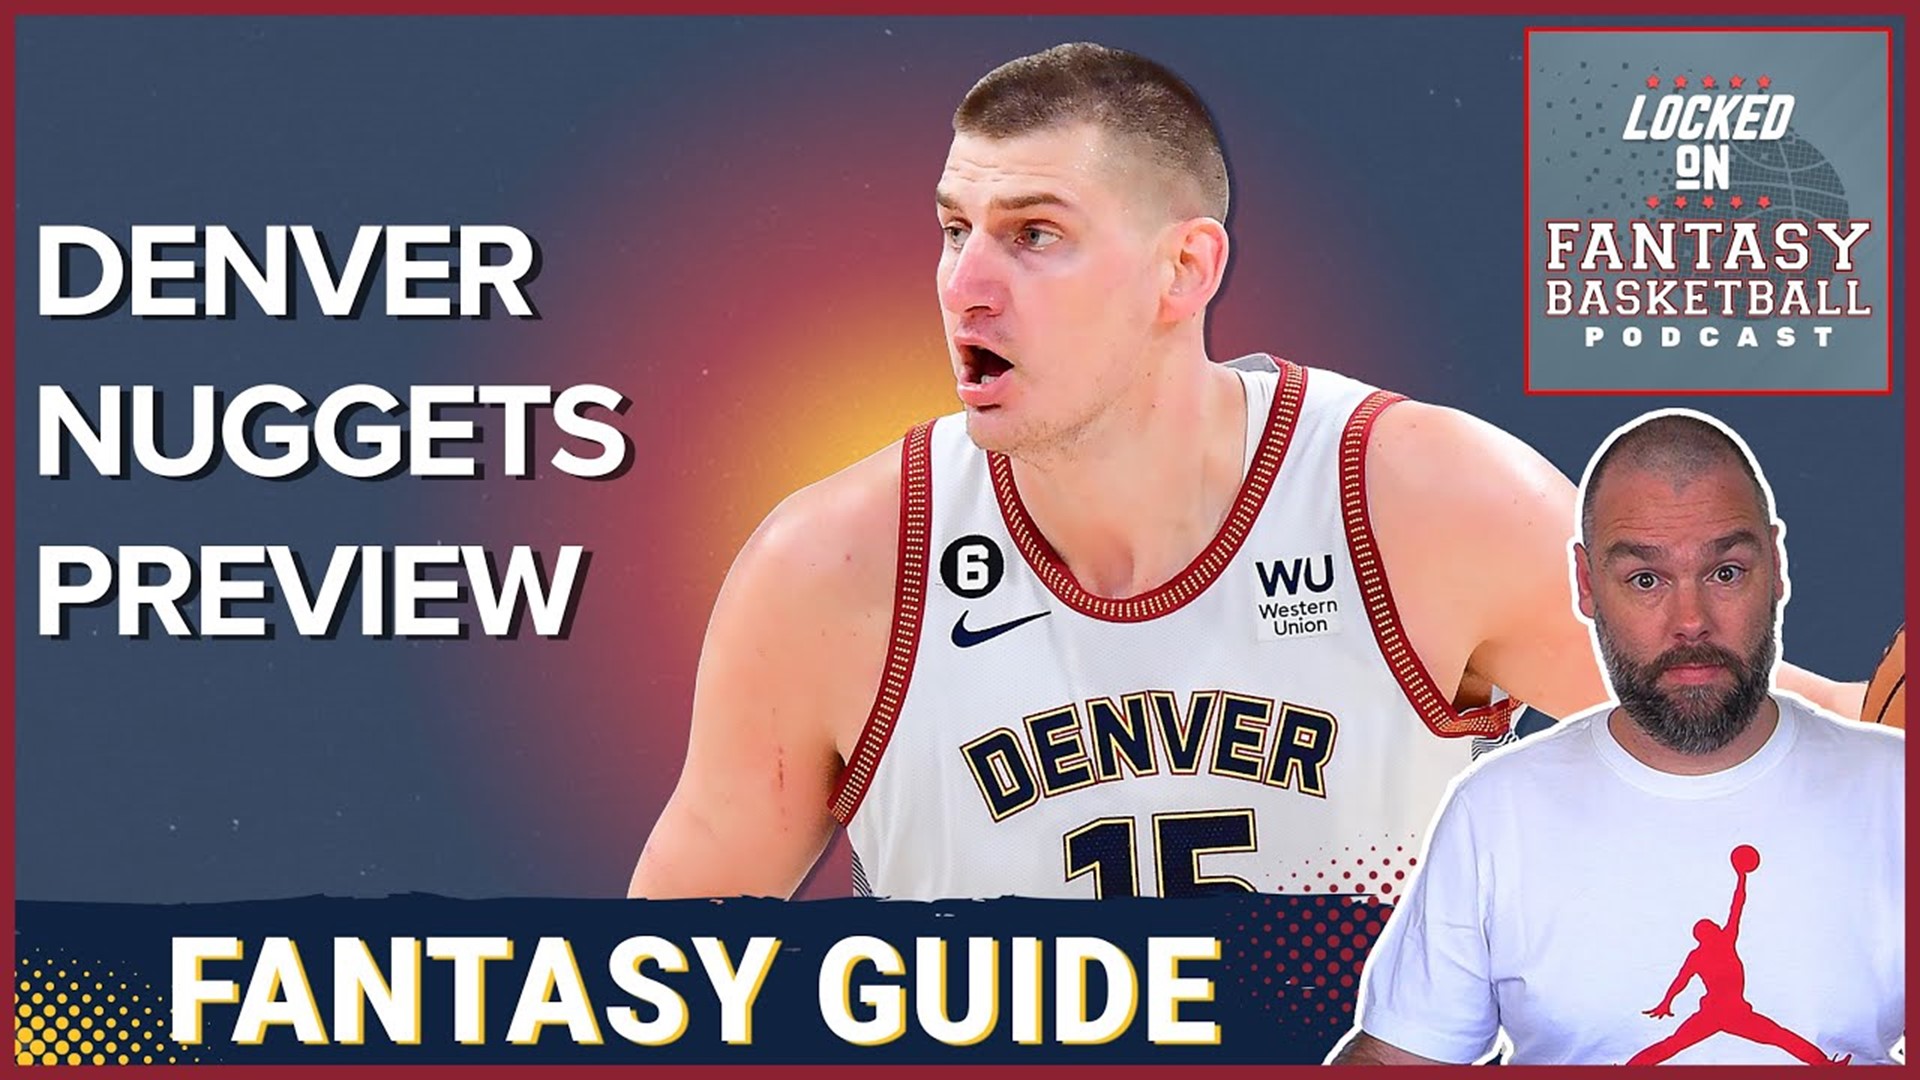 In this episode, Josh Lloyd focuses on the Denver Nuggets, including a discussion on fantasy titan Nikola Jokic, dubbed as the best player in the world.